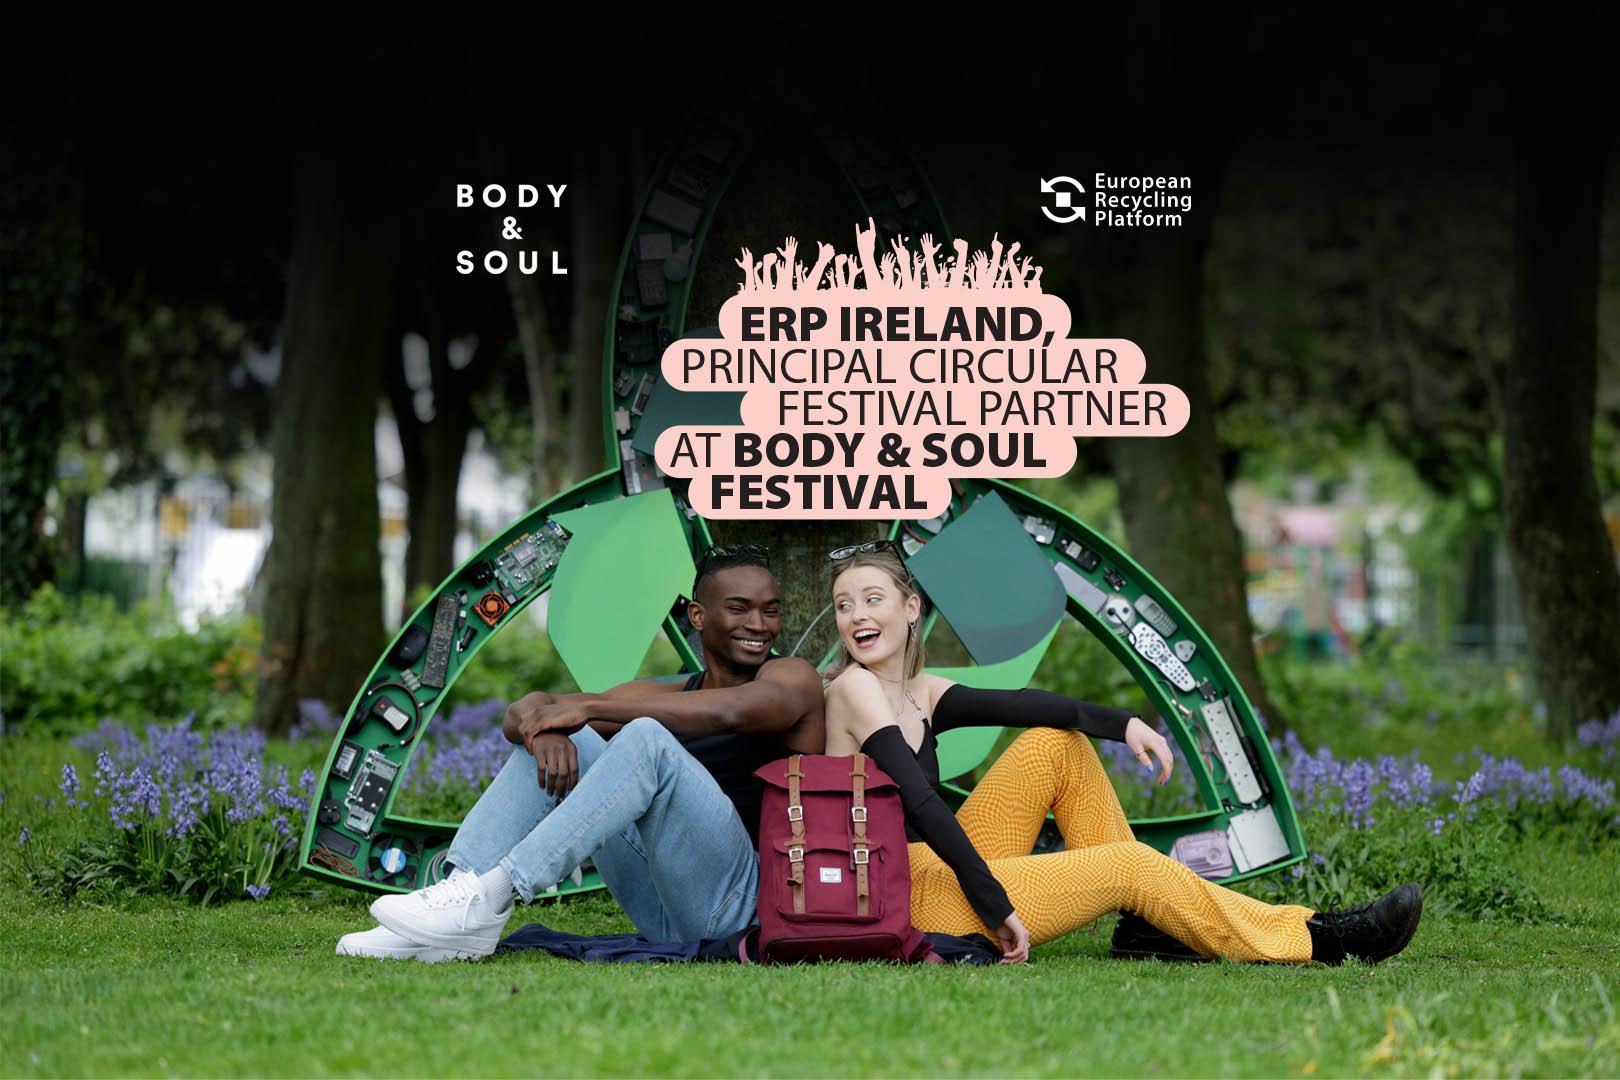 Win A pair of tickets to Body & Soul 2022 thanks to The European Recycling Platform (ERP)